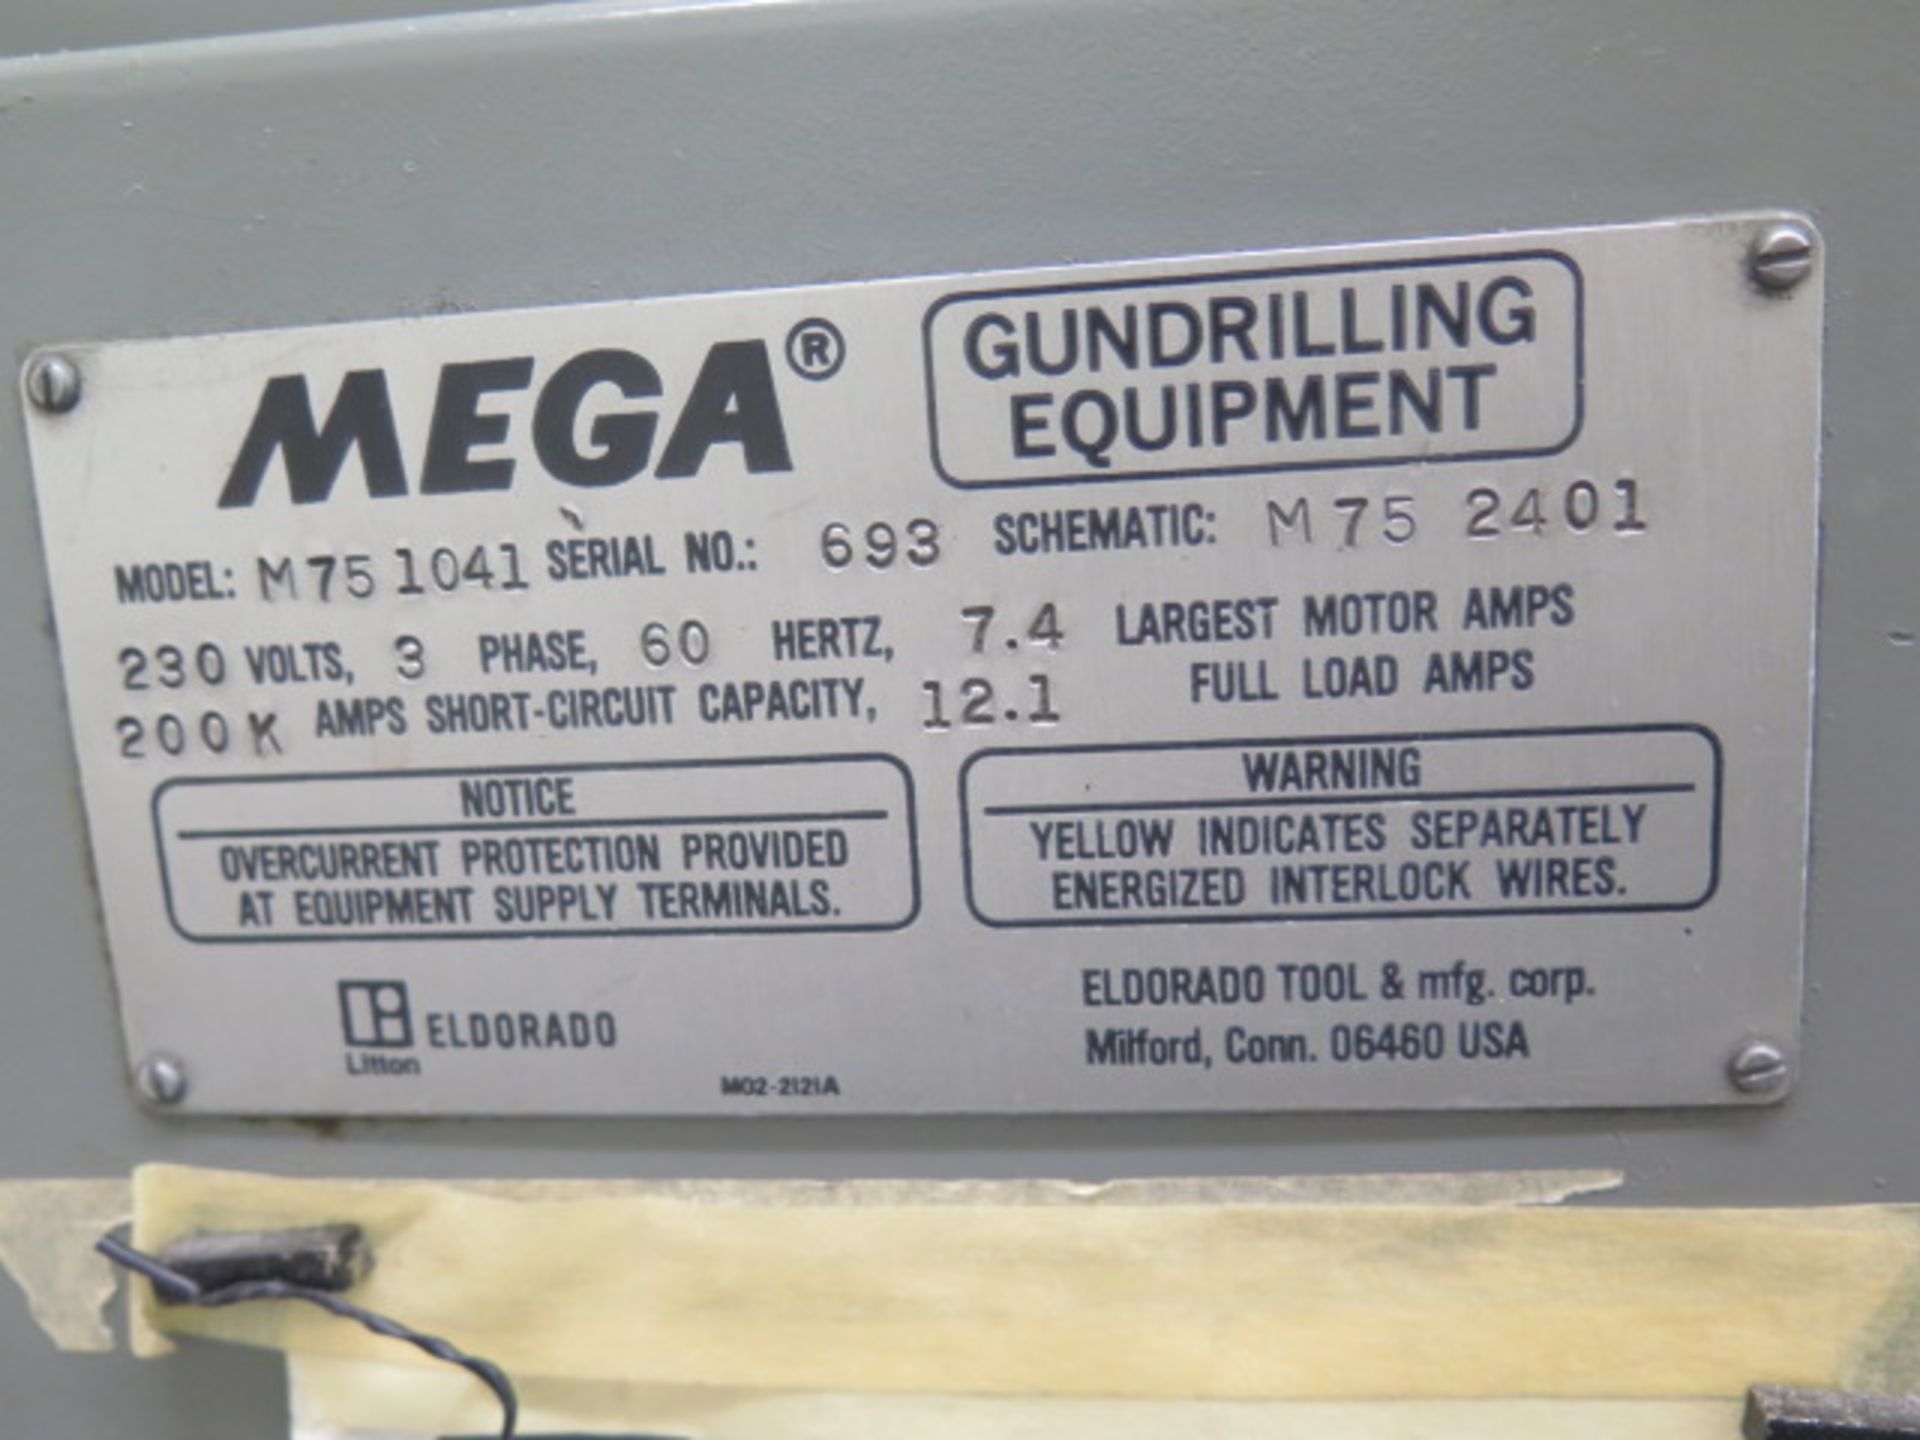 Mega Eldorado M75 1041 Gun Drilling Machine s/n 693 w/ Coolant and Filtration System SOLD AS-IS - Image 11 of 11